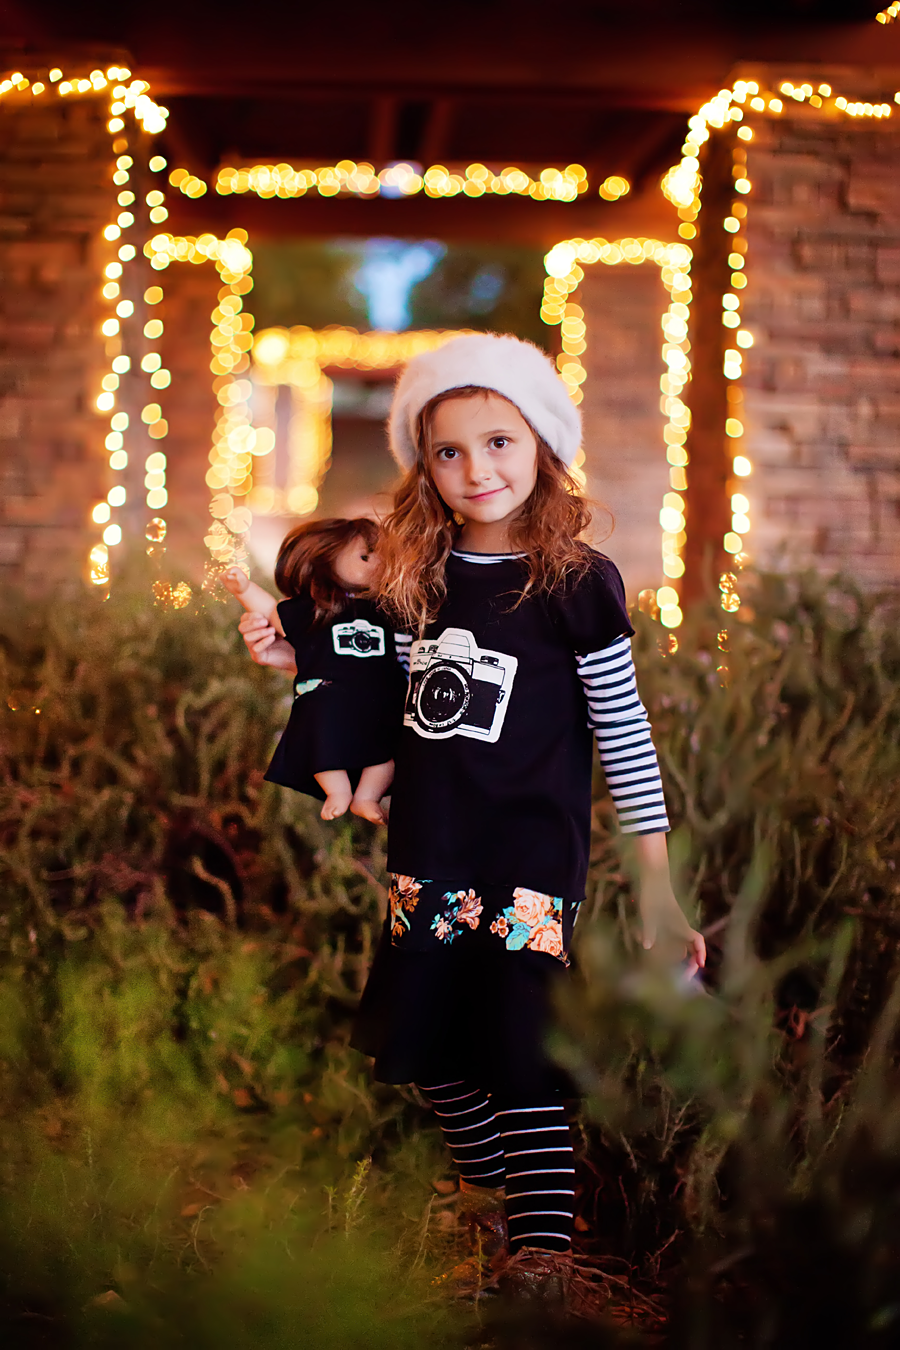 Great for all seasons! Photography by Laura Winslow Photography via lilblueboo.com